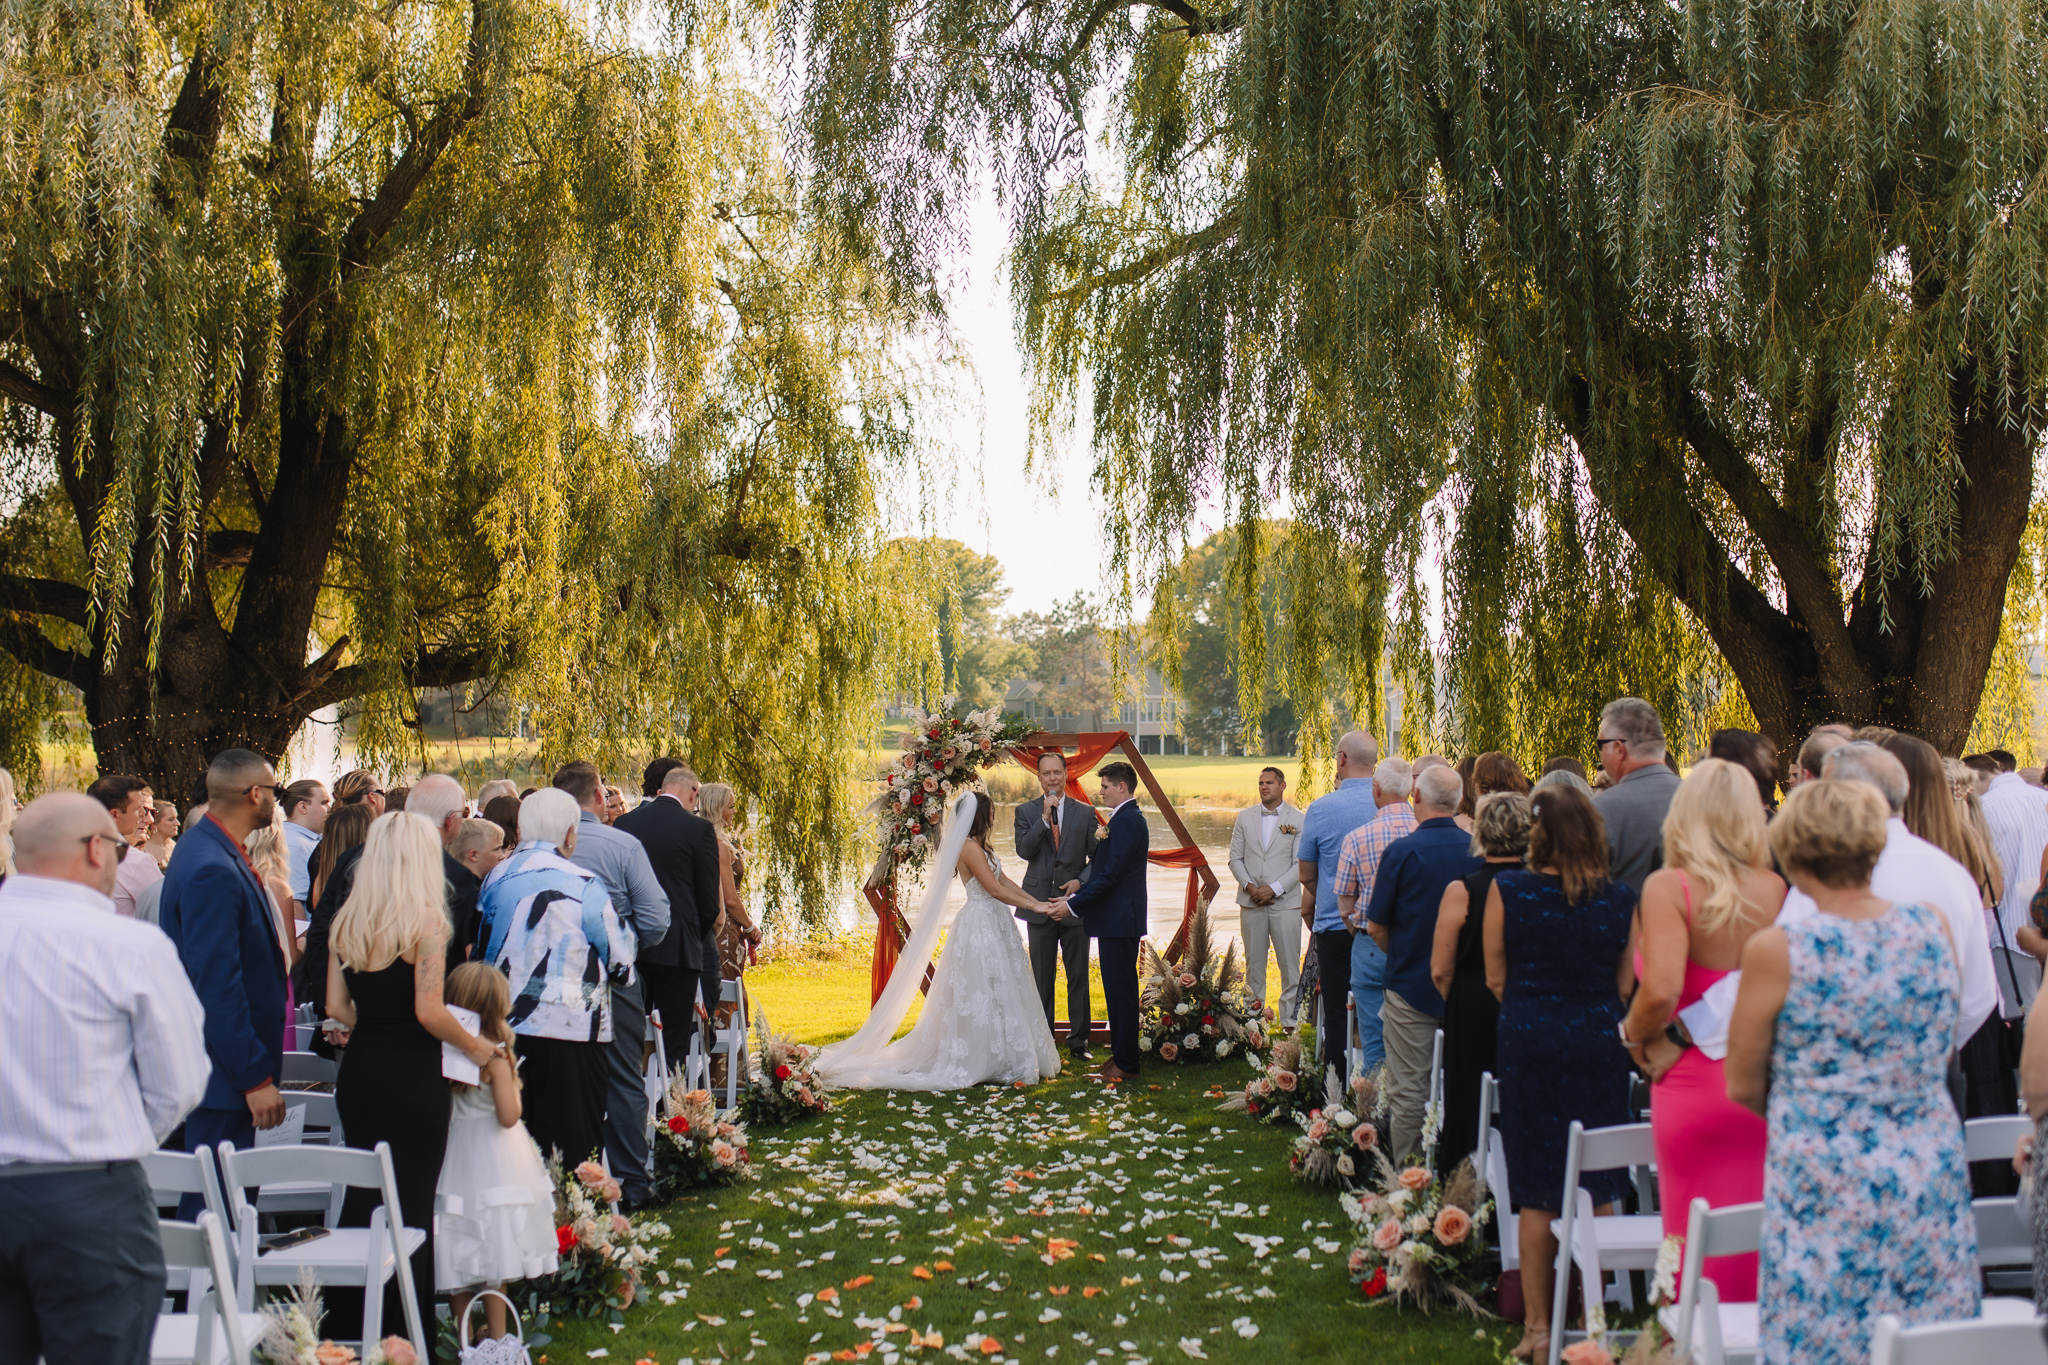 Beautiful outdoor summer wedding ceremony in Stillwater, Minnesota between two willow trees with a lake in the background